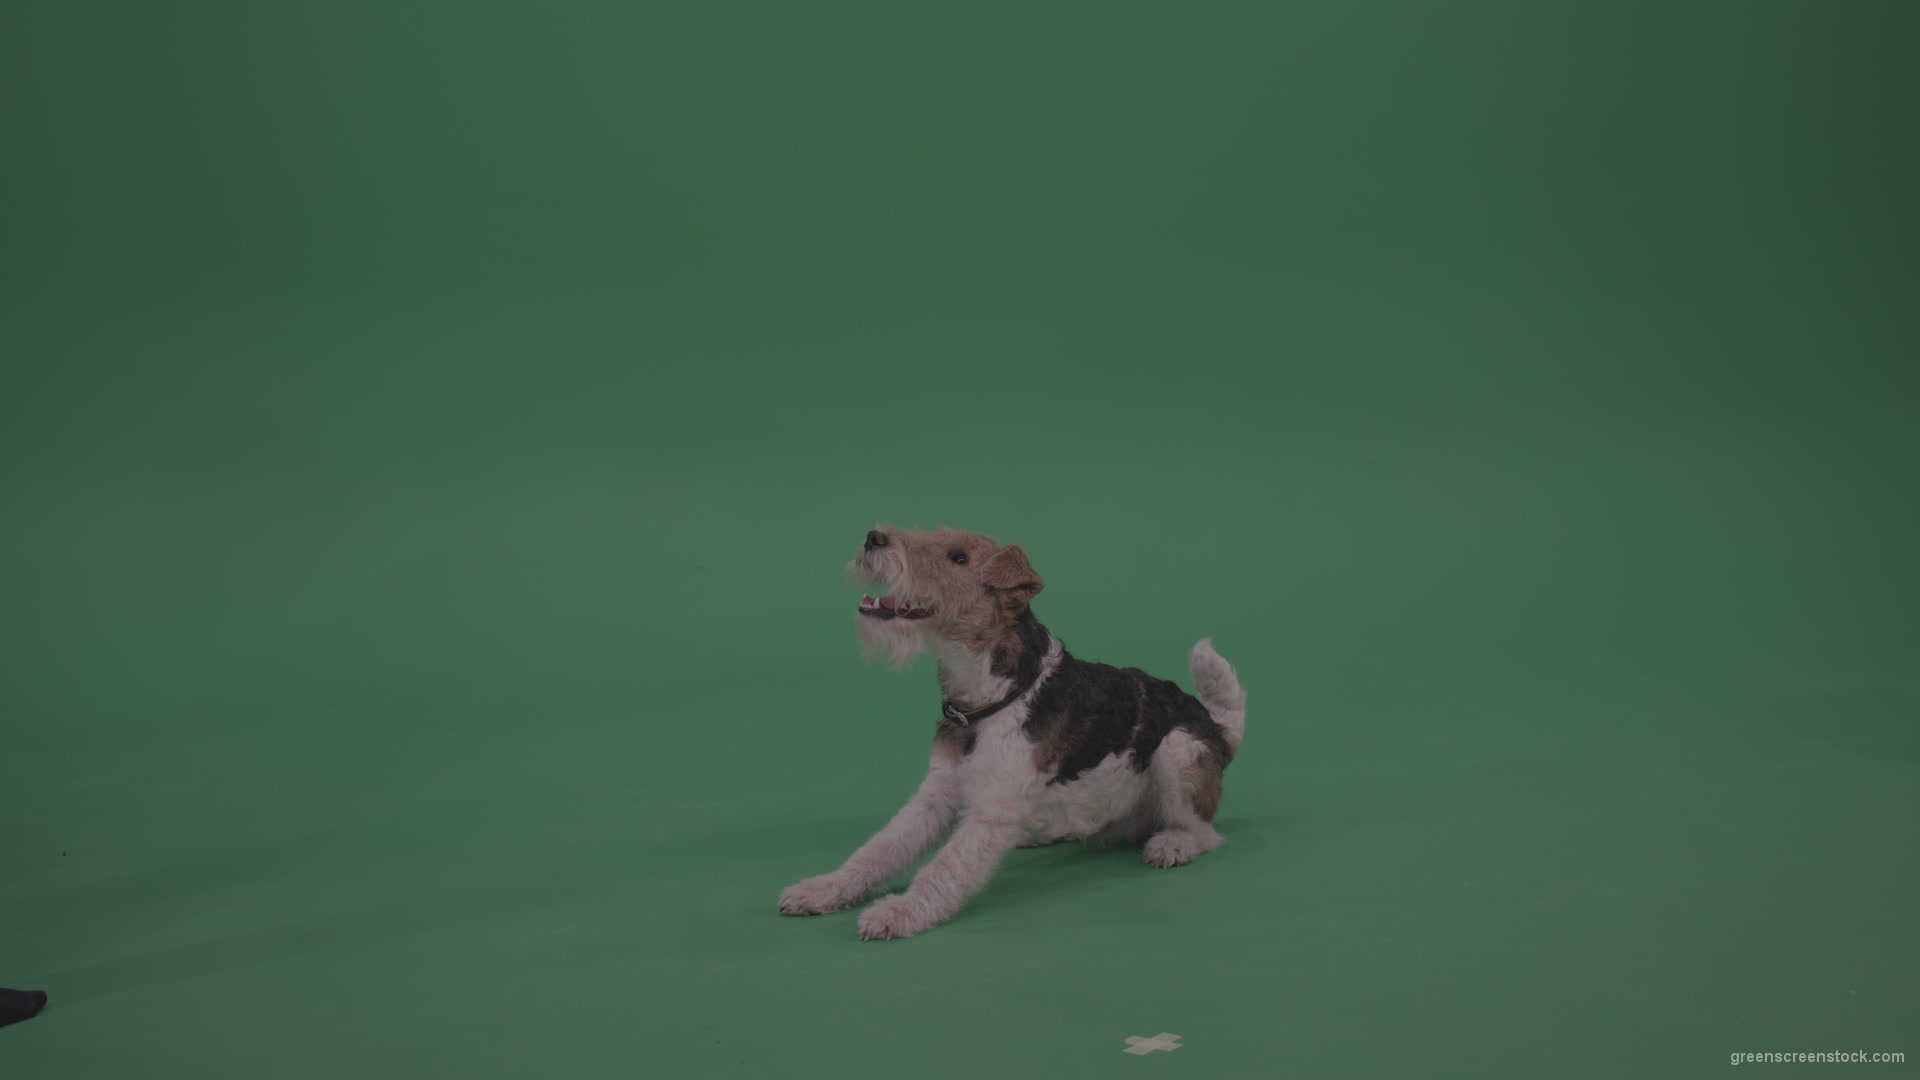 Wire-Fox-Terrier-Standing-On-Back-Feet-Ann-Serving-Then-Lies-Down-On-The-Ground-On-Green-Screen-Wall-Background_005 Green Screen Stock